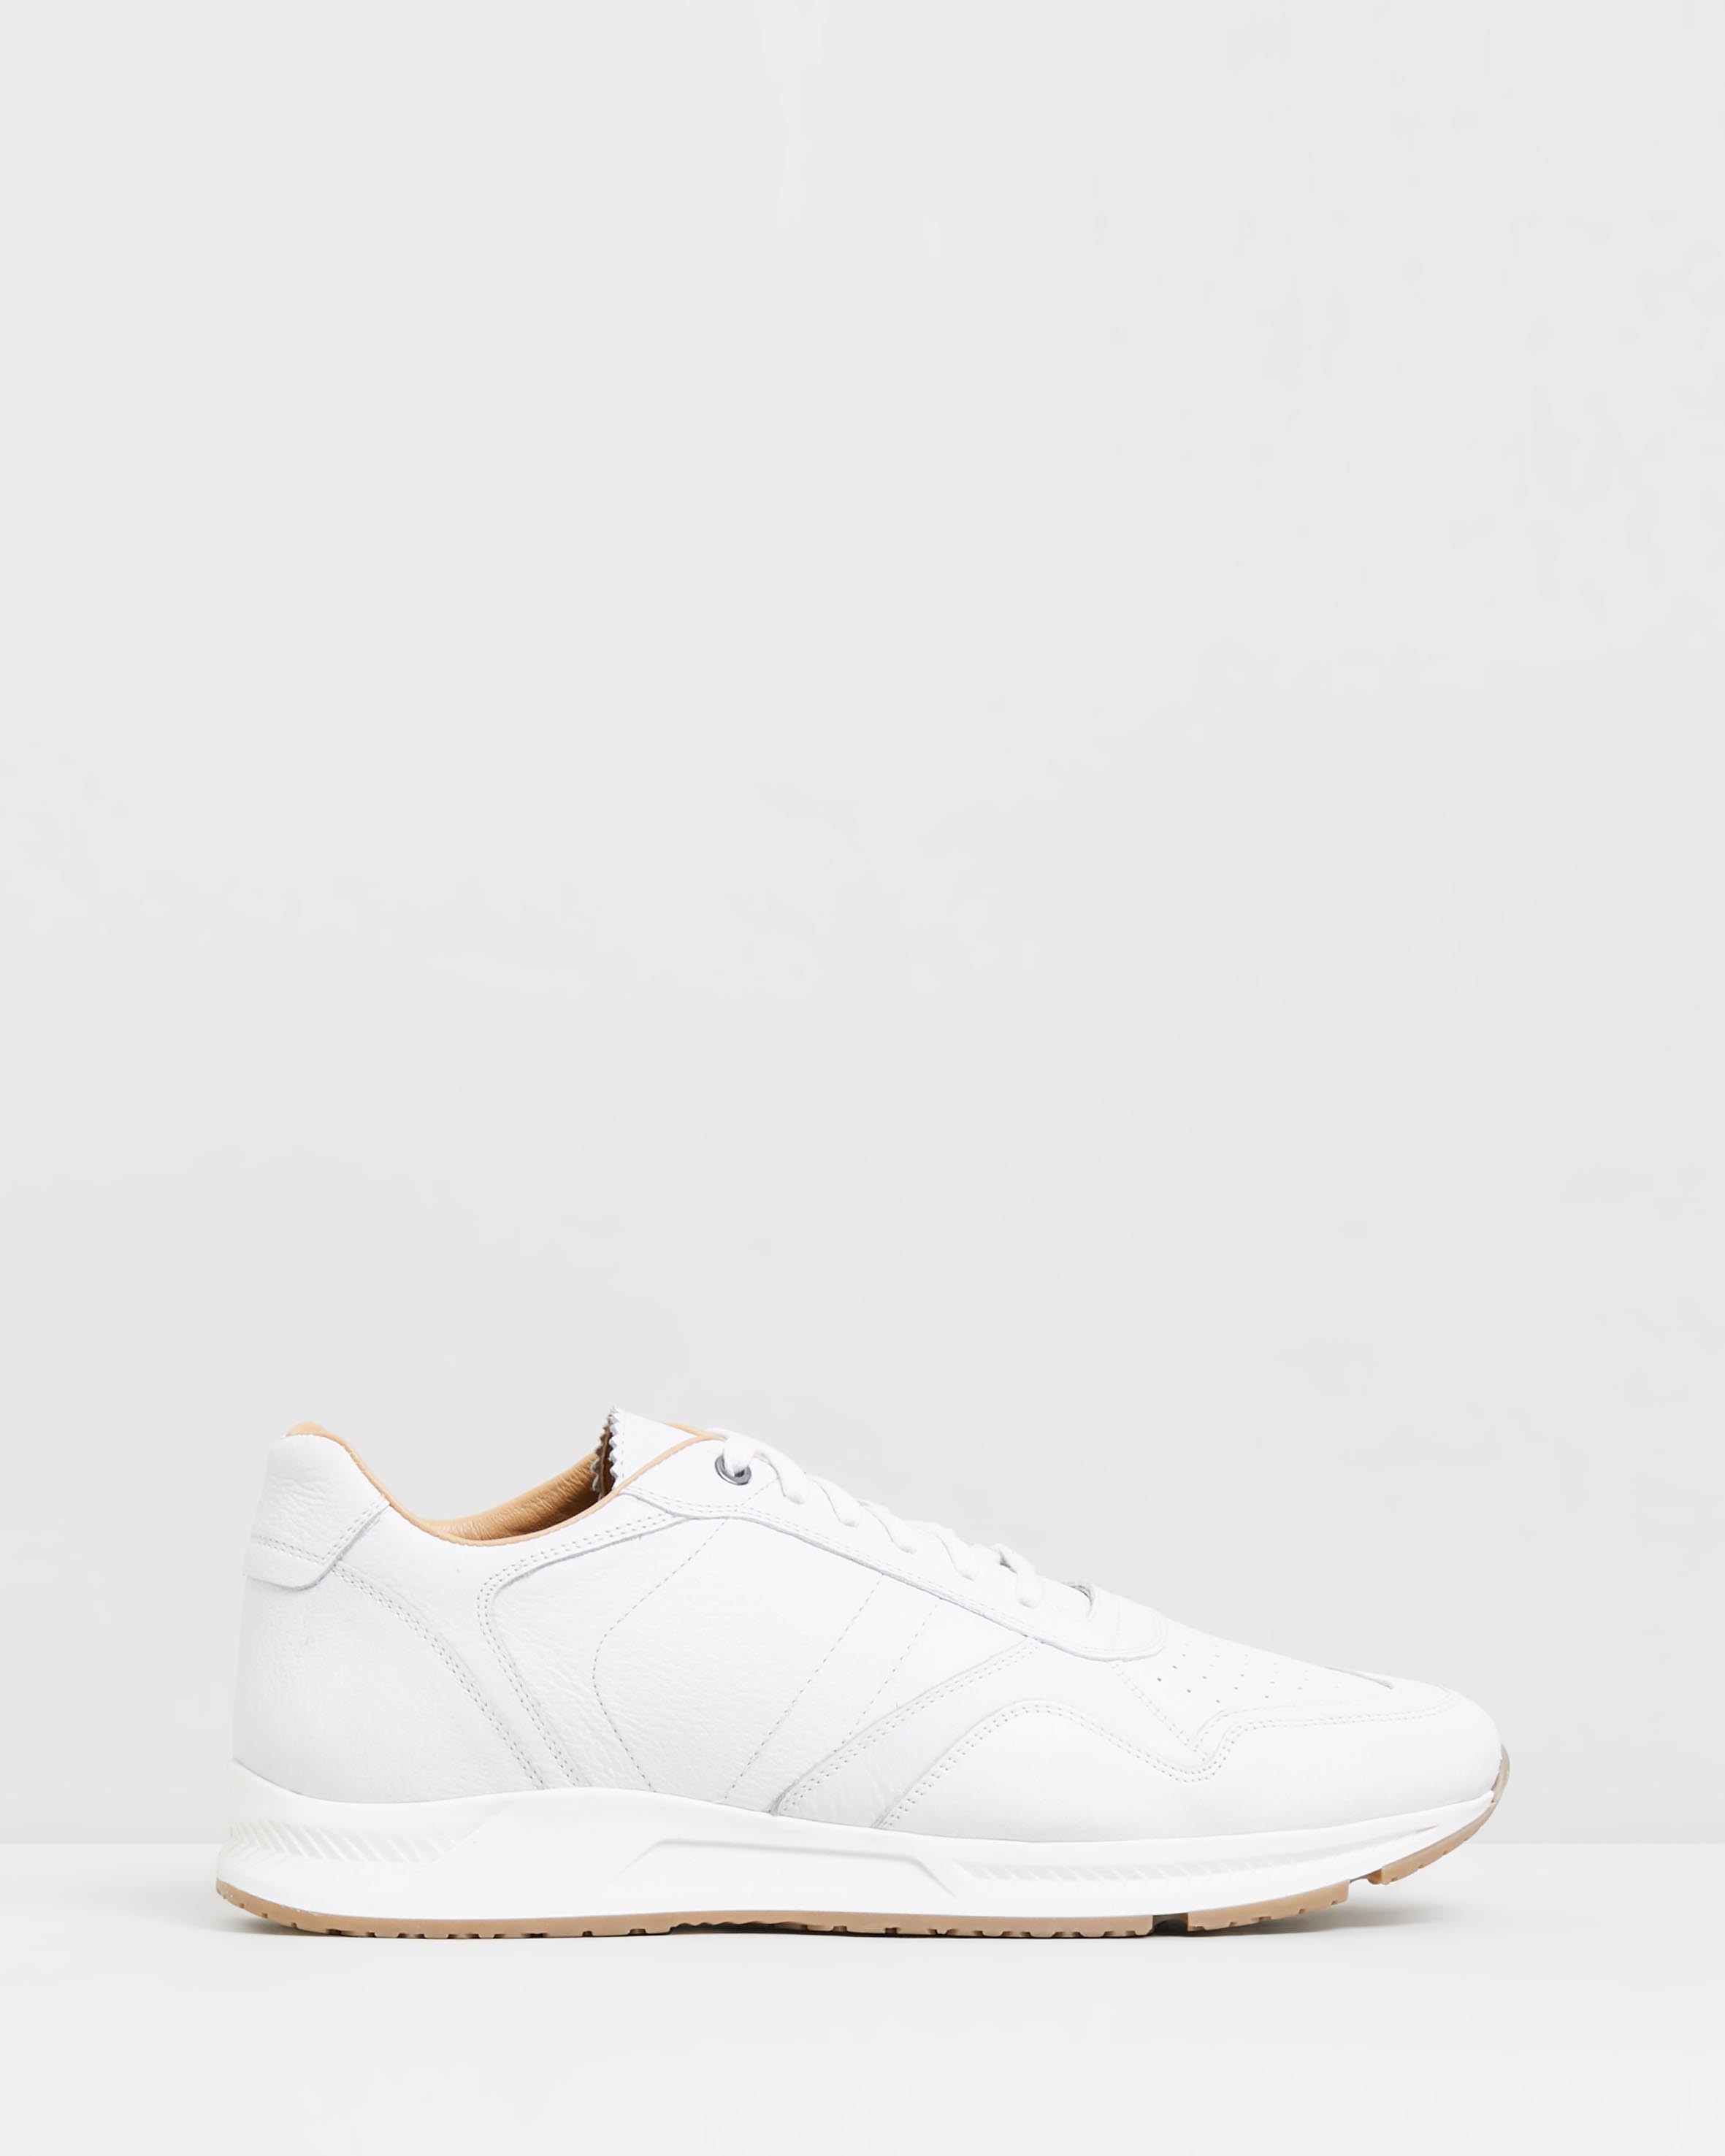 Mahrez Leather Sneakers White by Double Oak Mills | ShoeSales